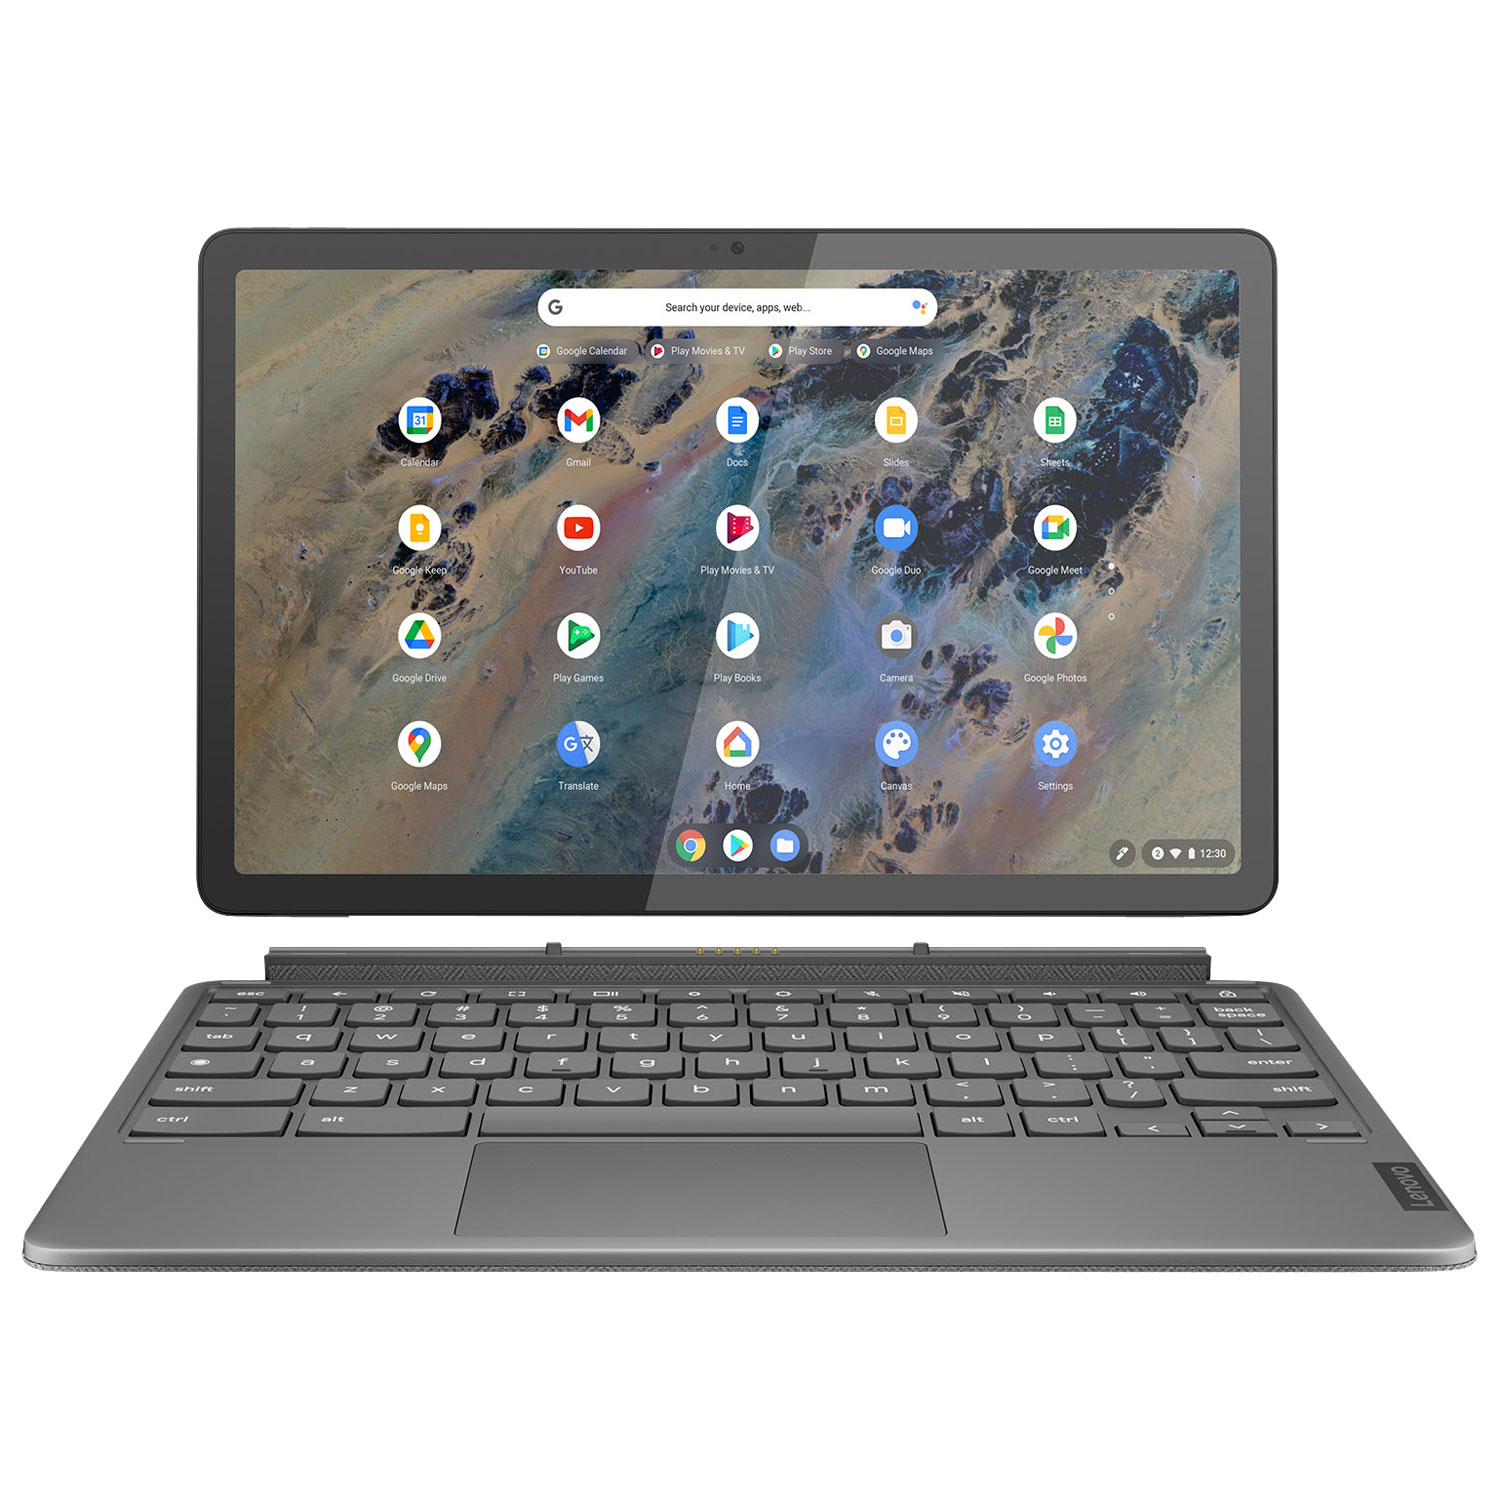 Lenovo IdeaPad Duet 3 128GB ChromeOS Tablet w/ Keyboard (SnapDragon 7c 8-Core) - Storm Grey - Only at Best Buy